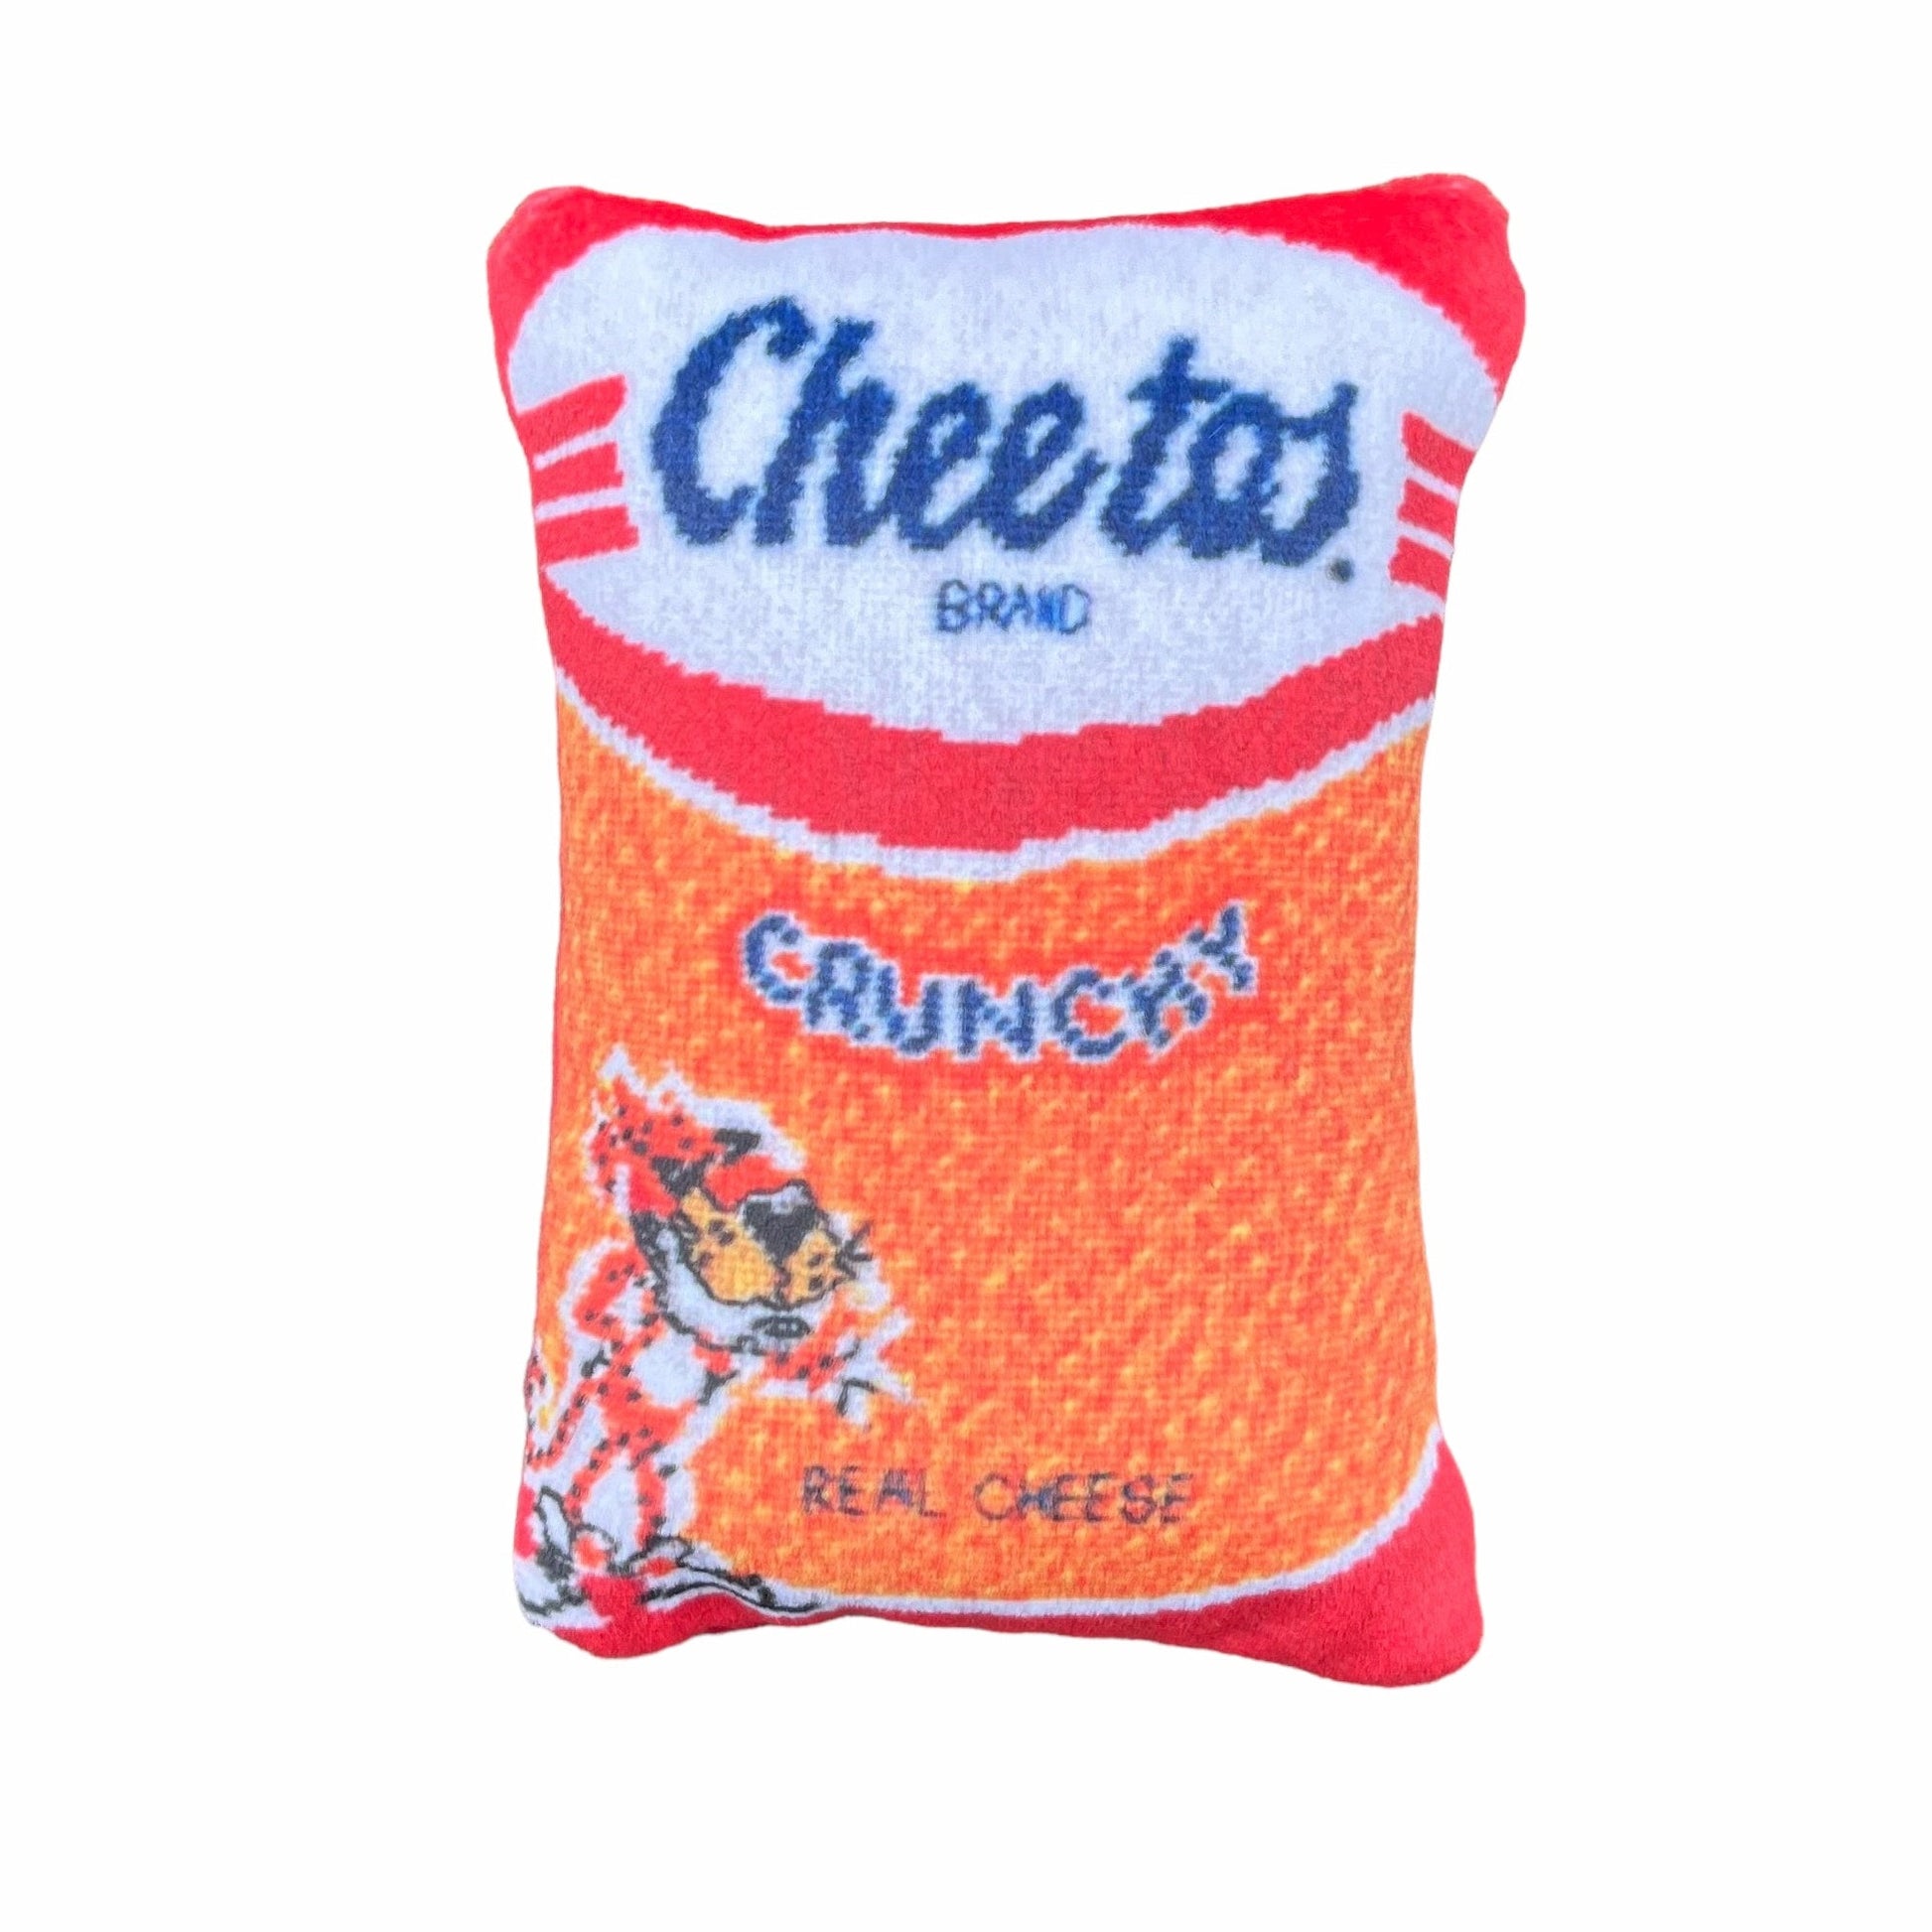 Velvet pillow with Cheetos crunchy logo and Chester - looks like a bag of Cheetos